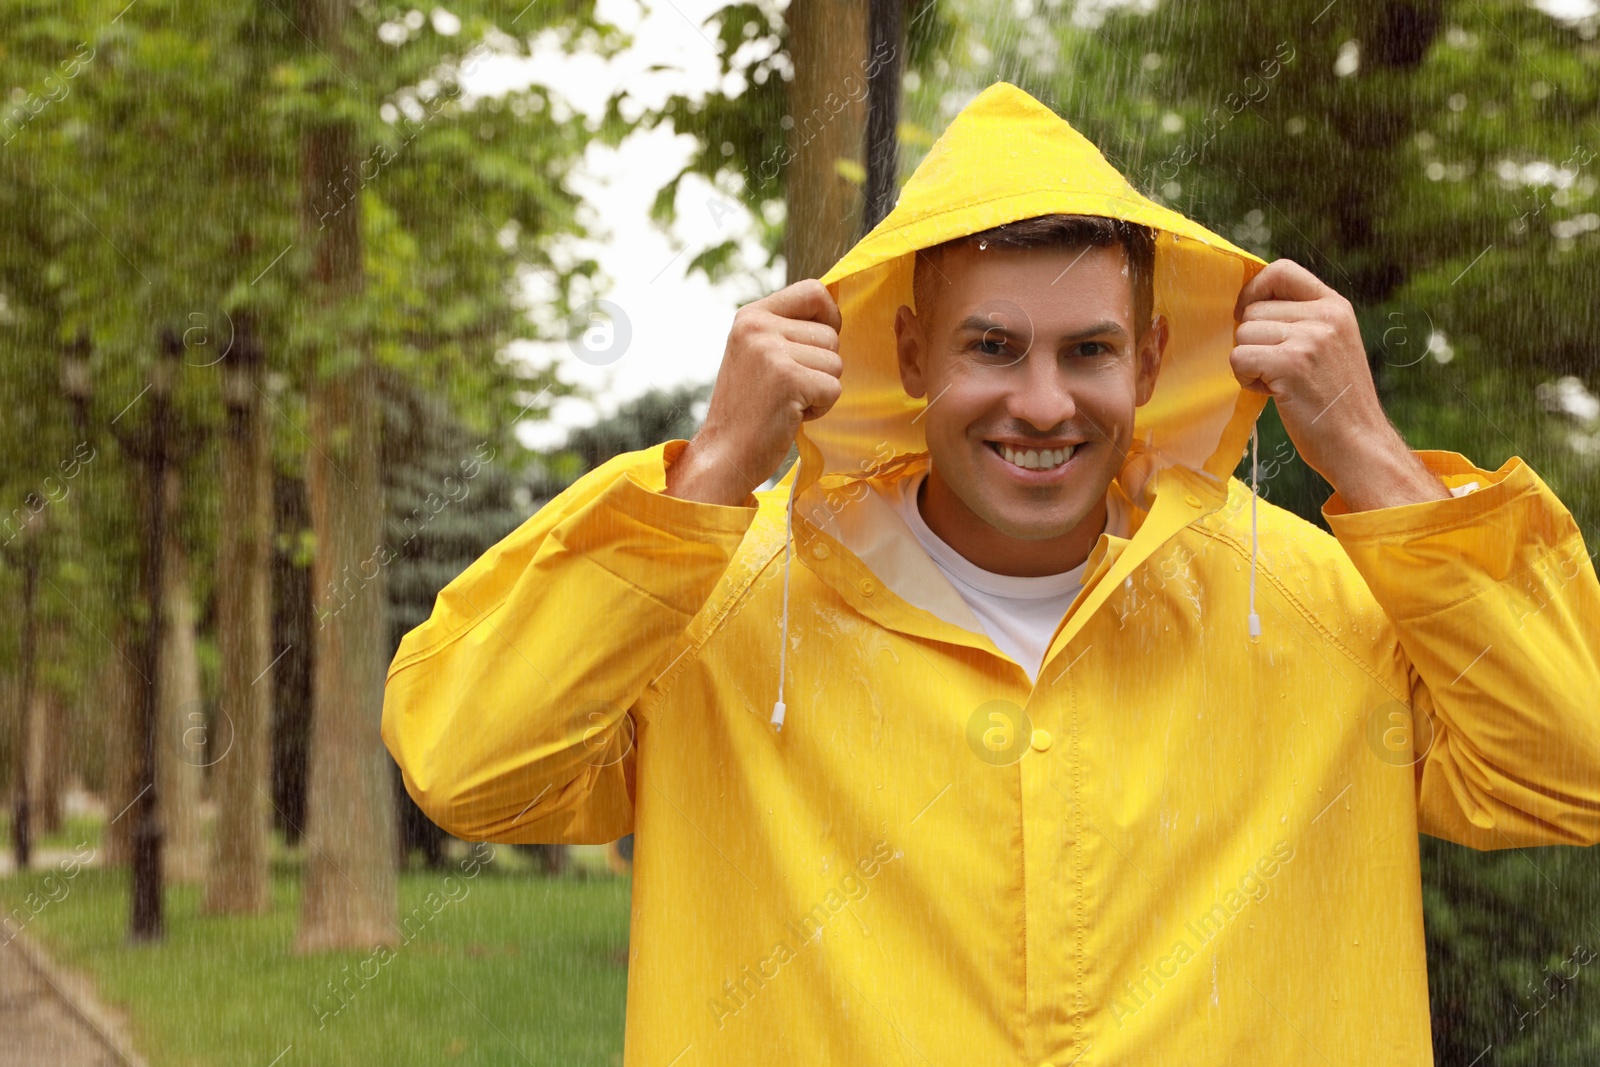 Photo of Man with raincoat walking under rain in park